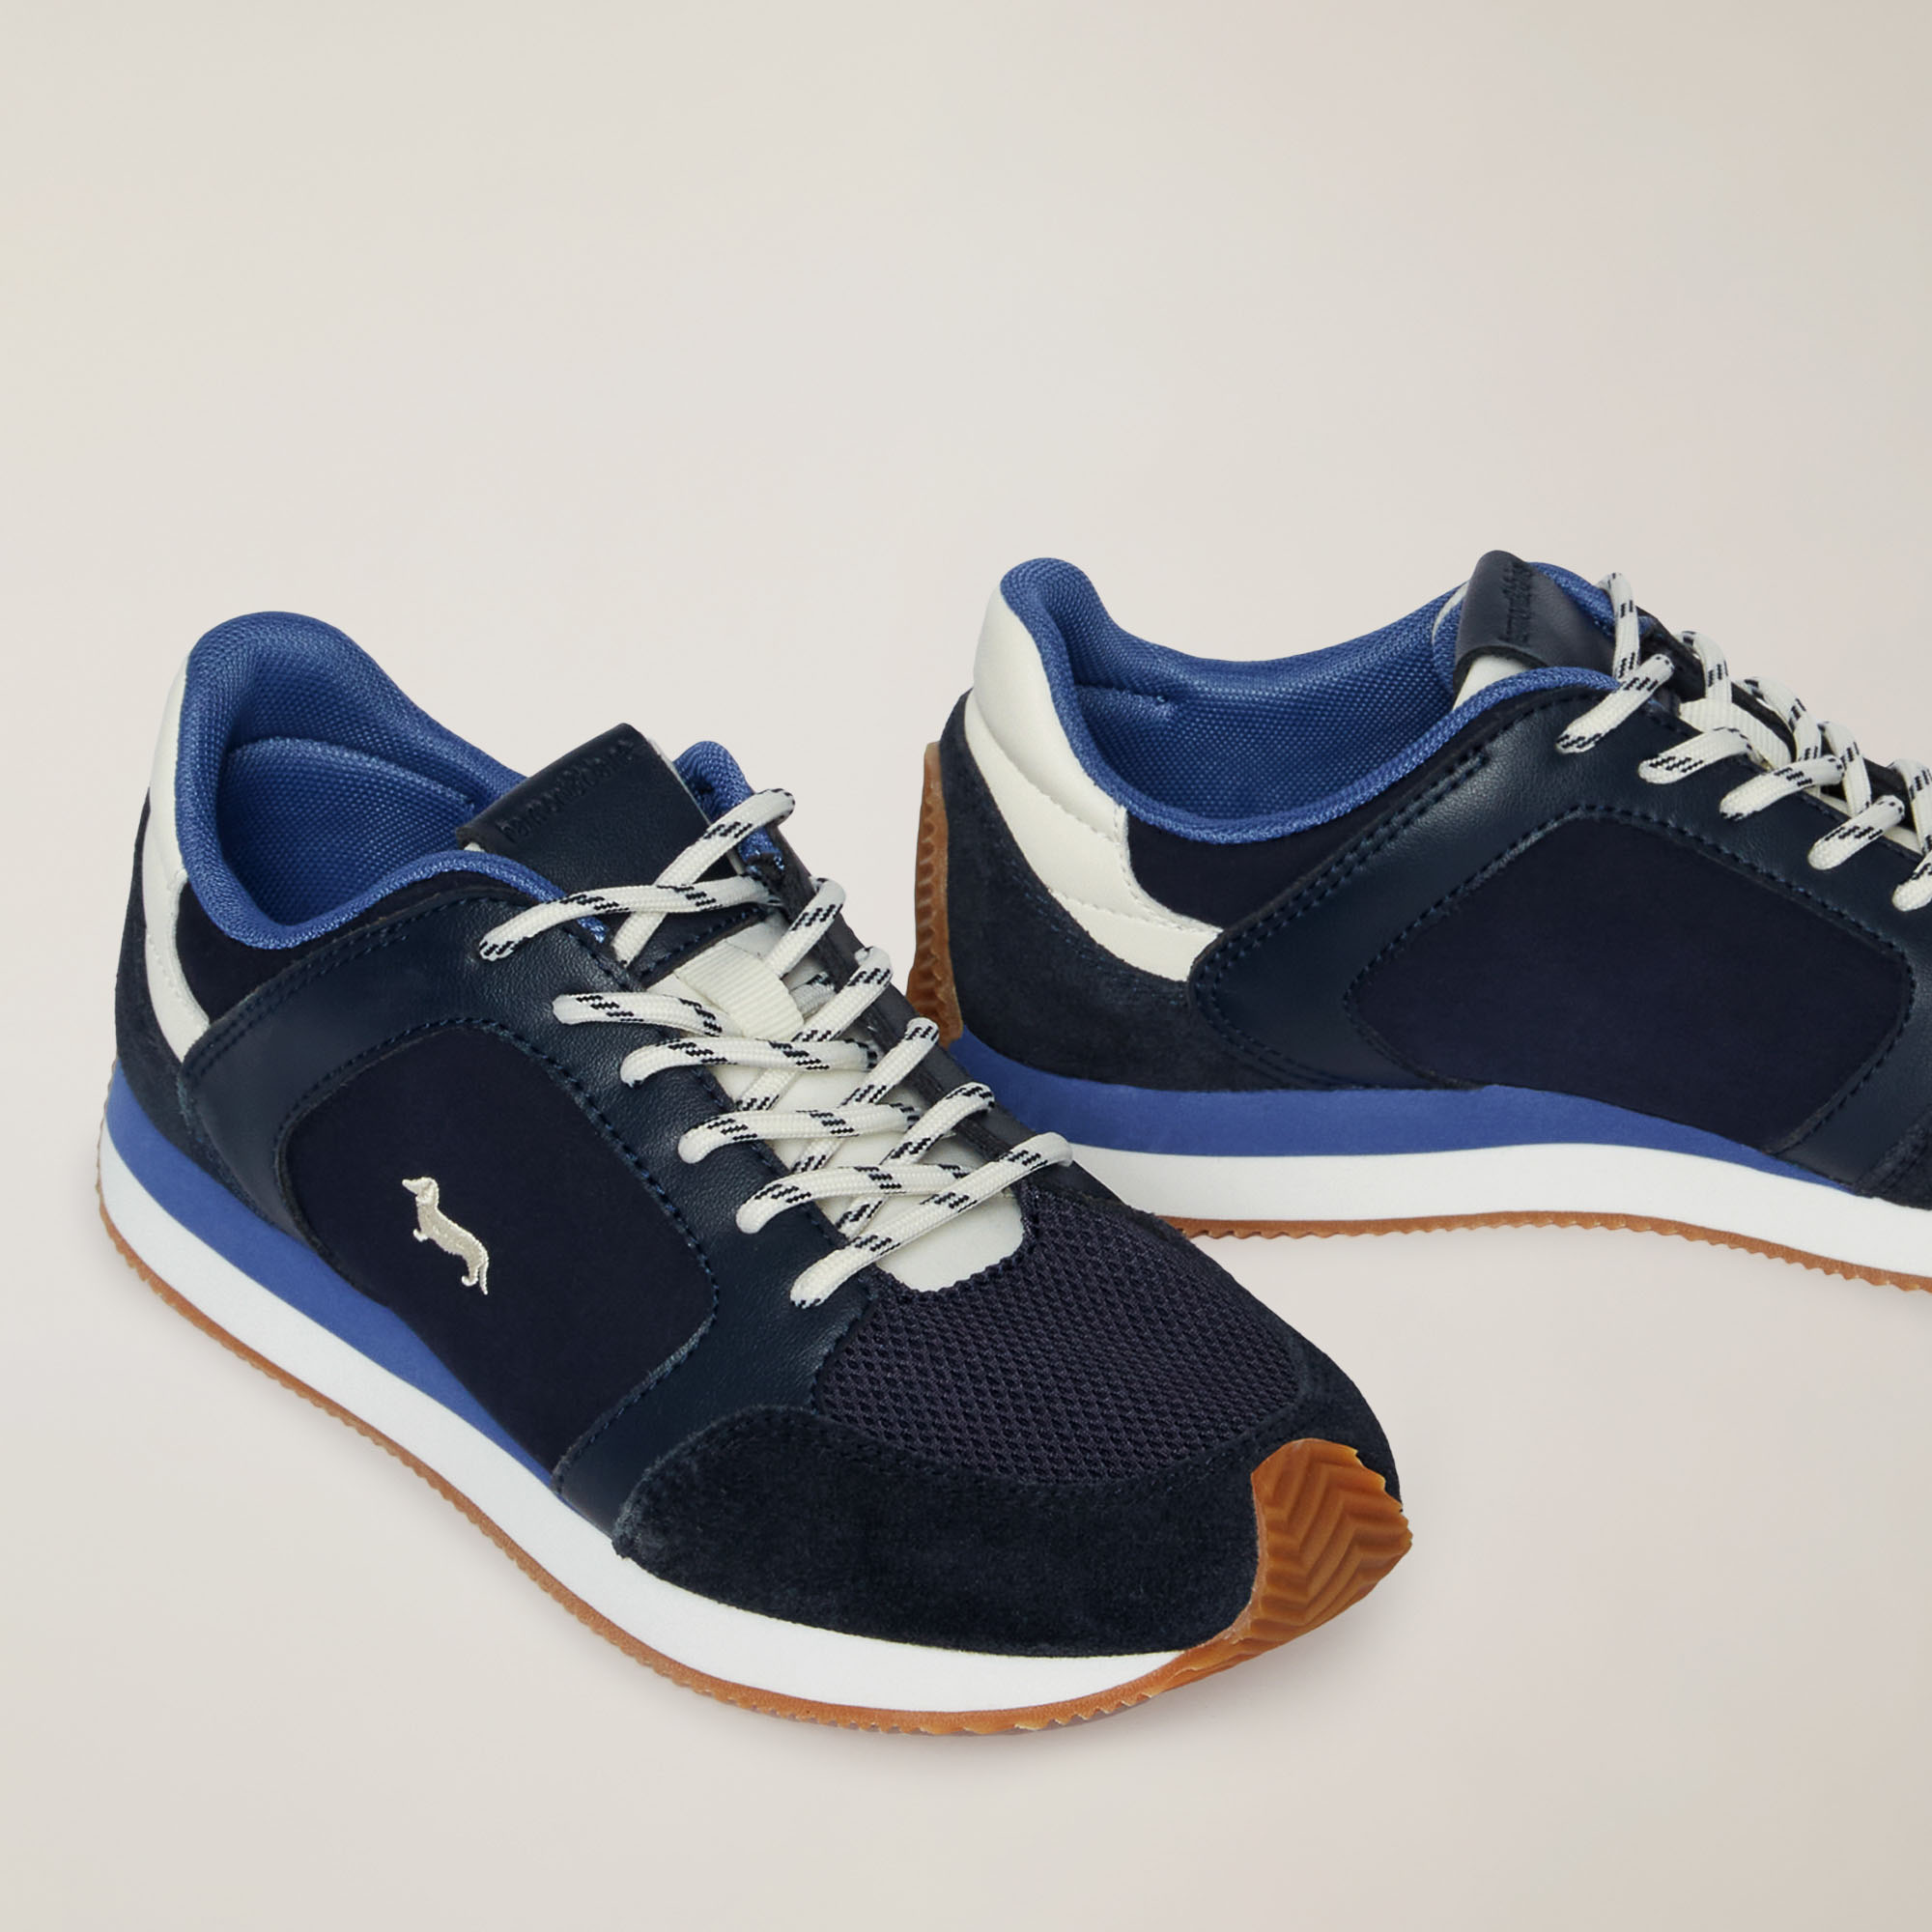 Sneakers Suola A Contrasto, Blu Navy, large image number 3